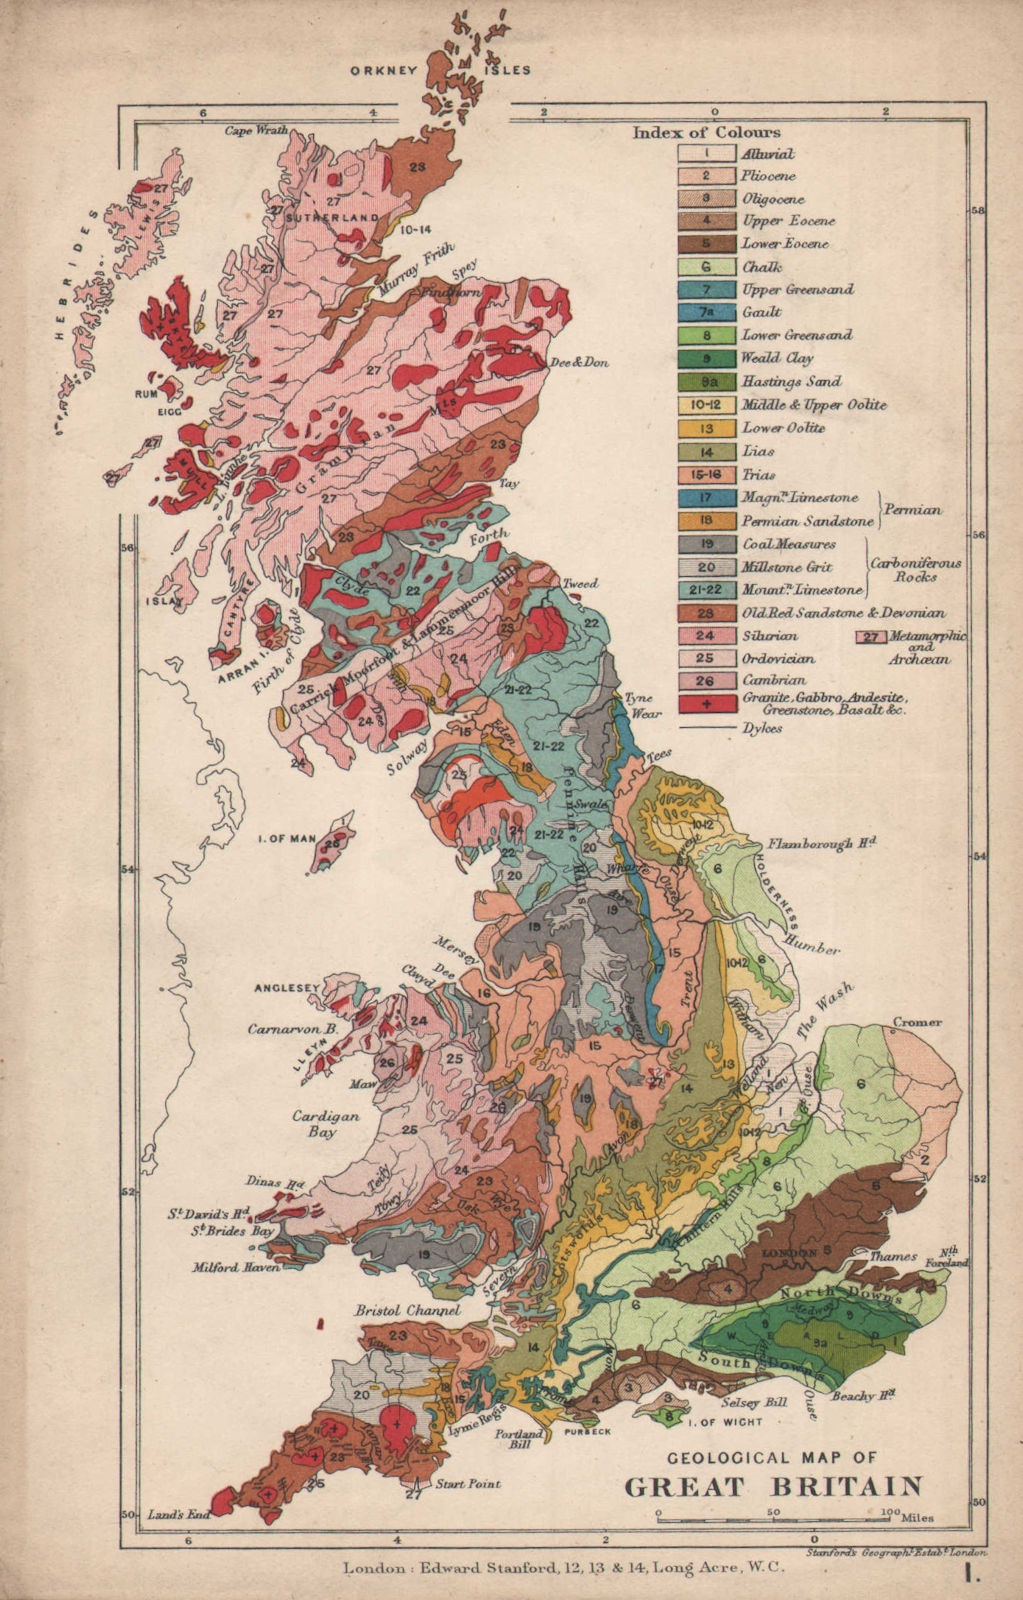 Associate Product UK Geological map of Great Britain 1907 old antique vintage plan chart